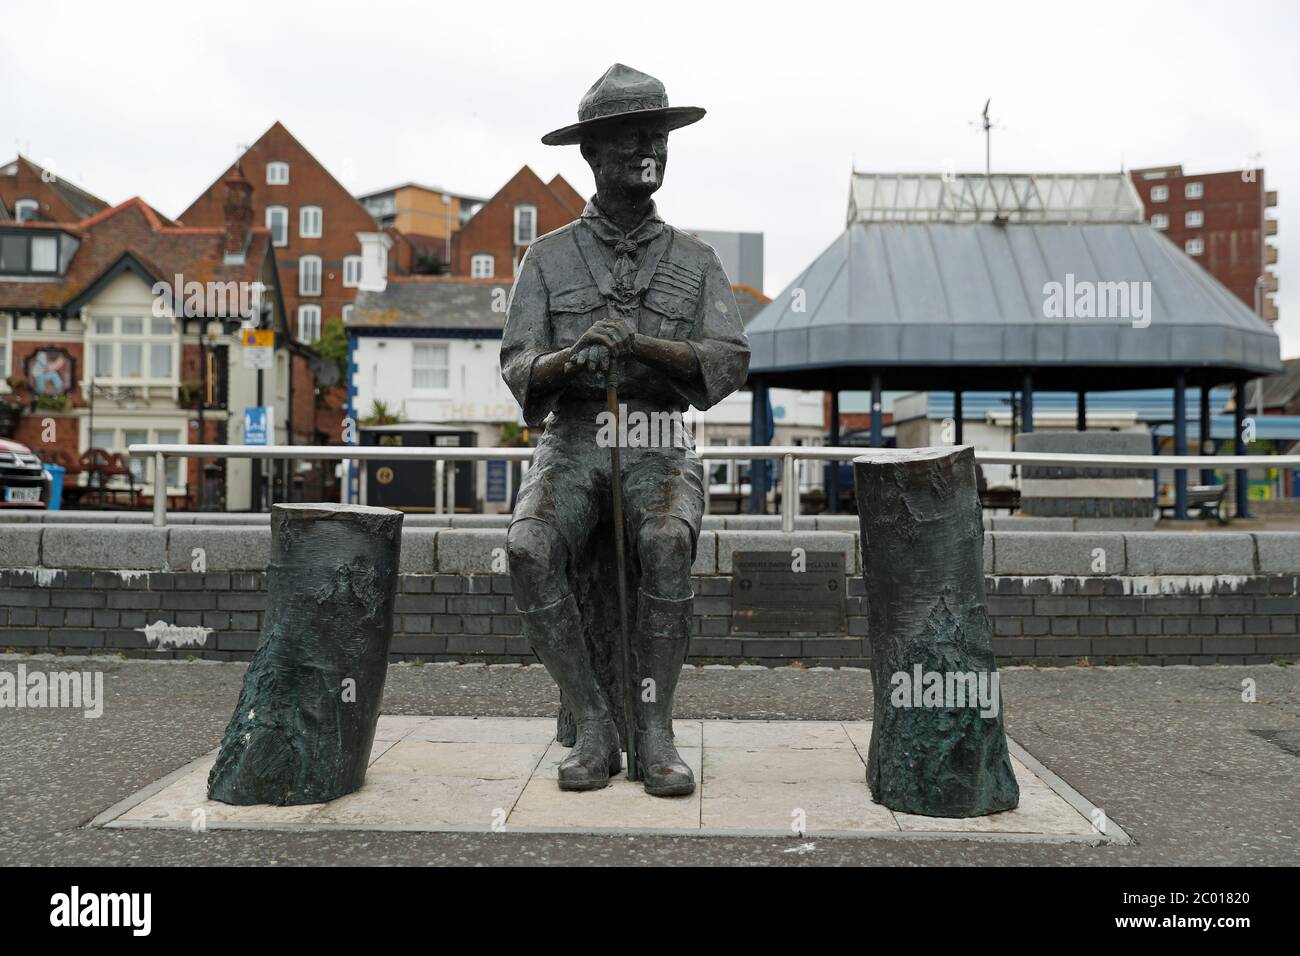 A statue of Robert Baden-Powell on Poole Quay in Dorset ahead of its expected removal to 'safe storage' following concerns about his actions while in the military and 'Nazi sympathies'. The action follows a raft of Black Lives Matter protests across the UK, sparked by the death of George Floyd, who was killed on May 25 while in police custody in the US city of Minneapolis. Stock Photo